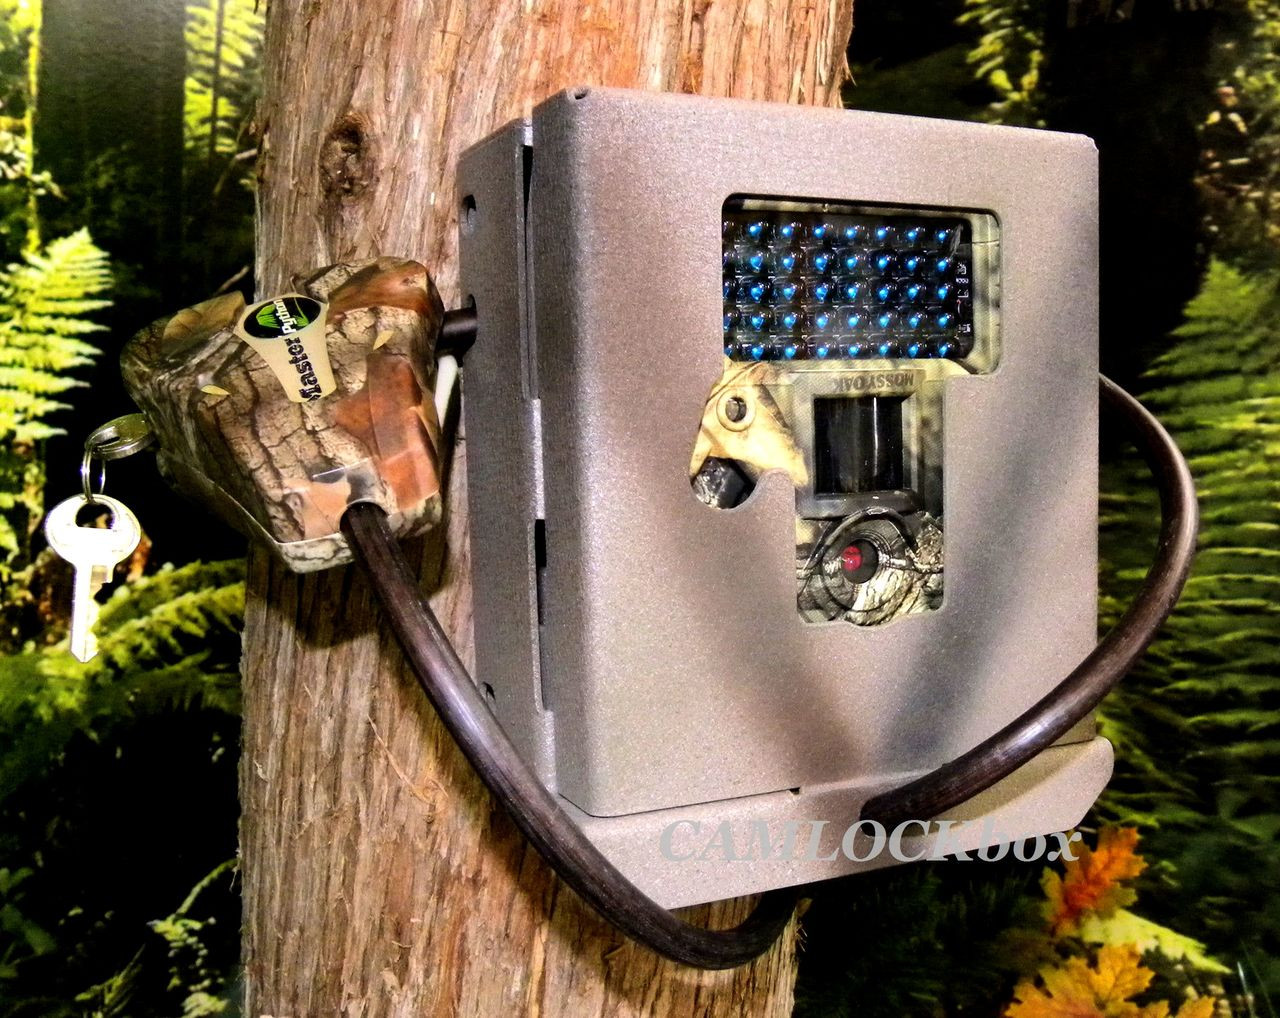 Camlock Box Covert Viper Security Box Only 